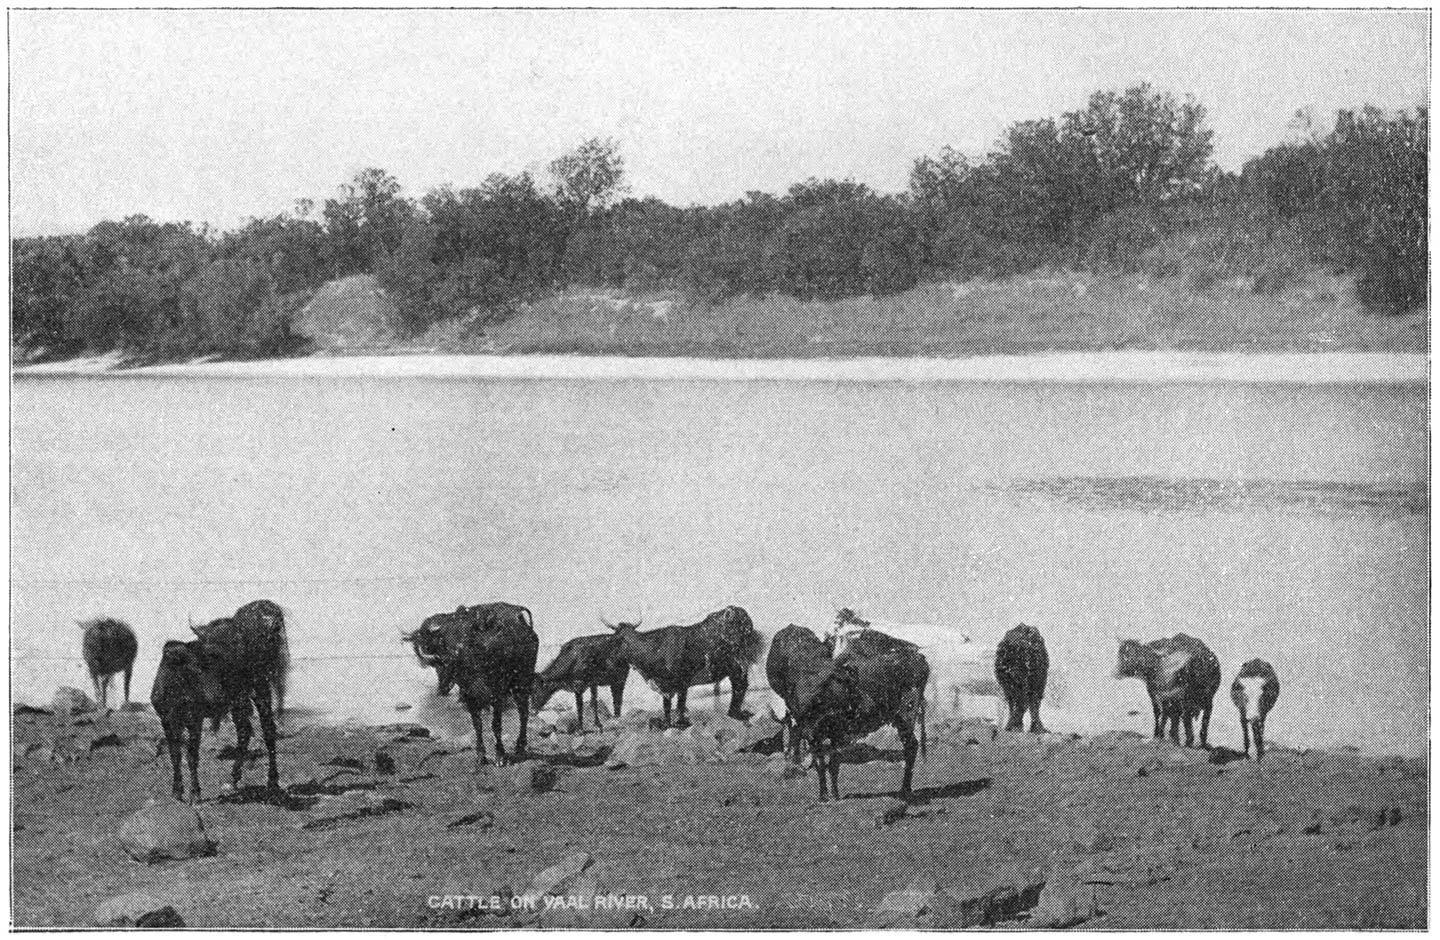 CATTLE ON THE VAAL RIVER.